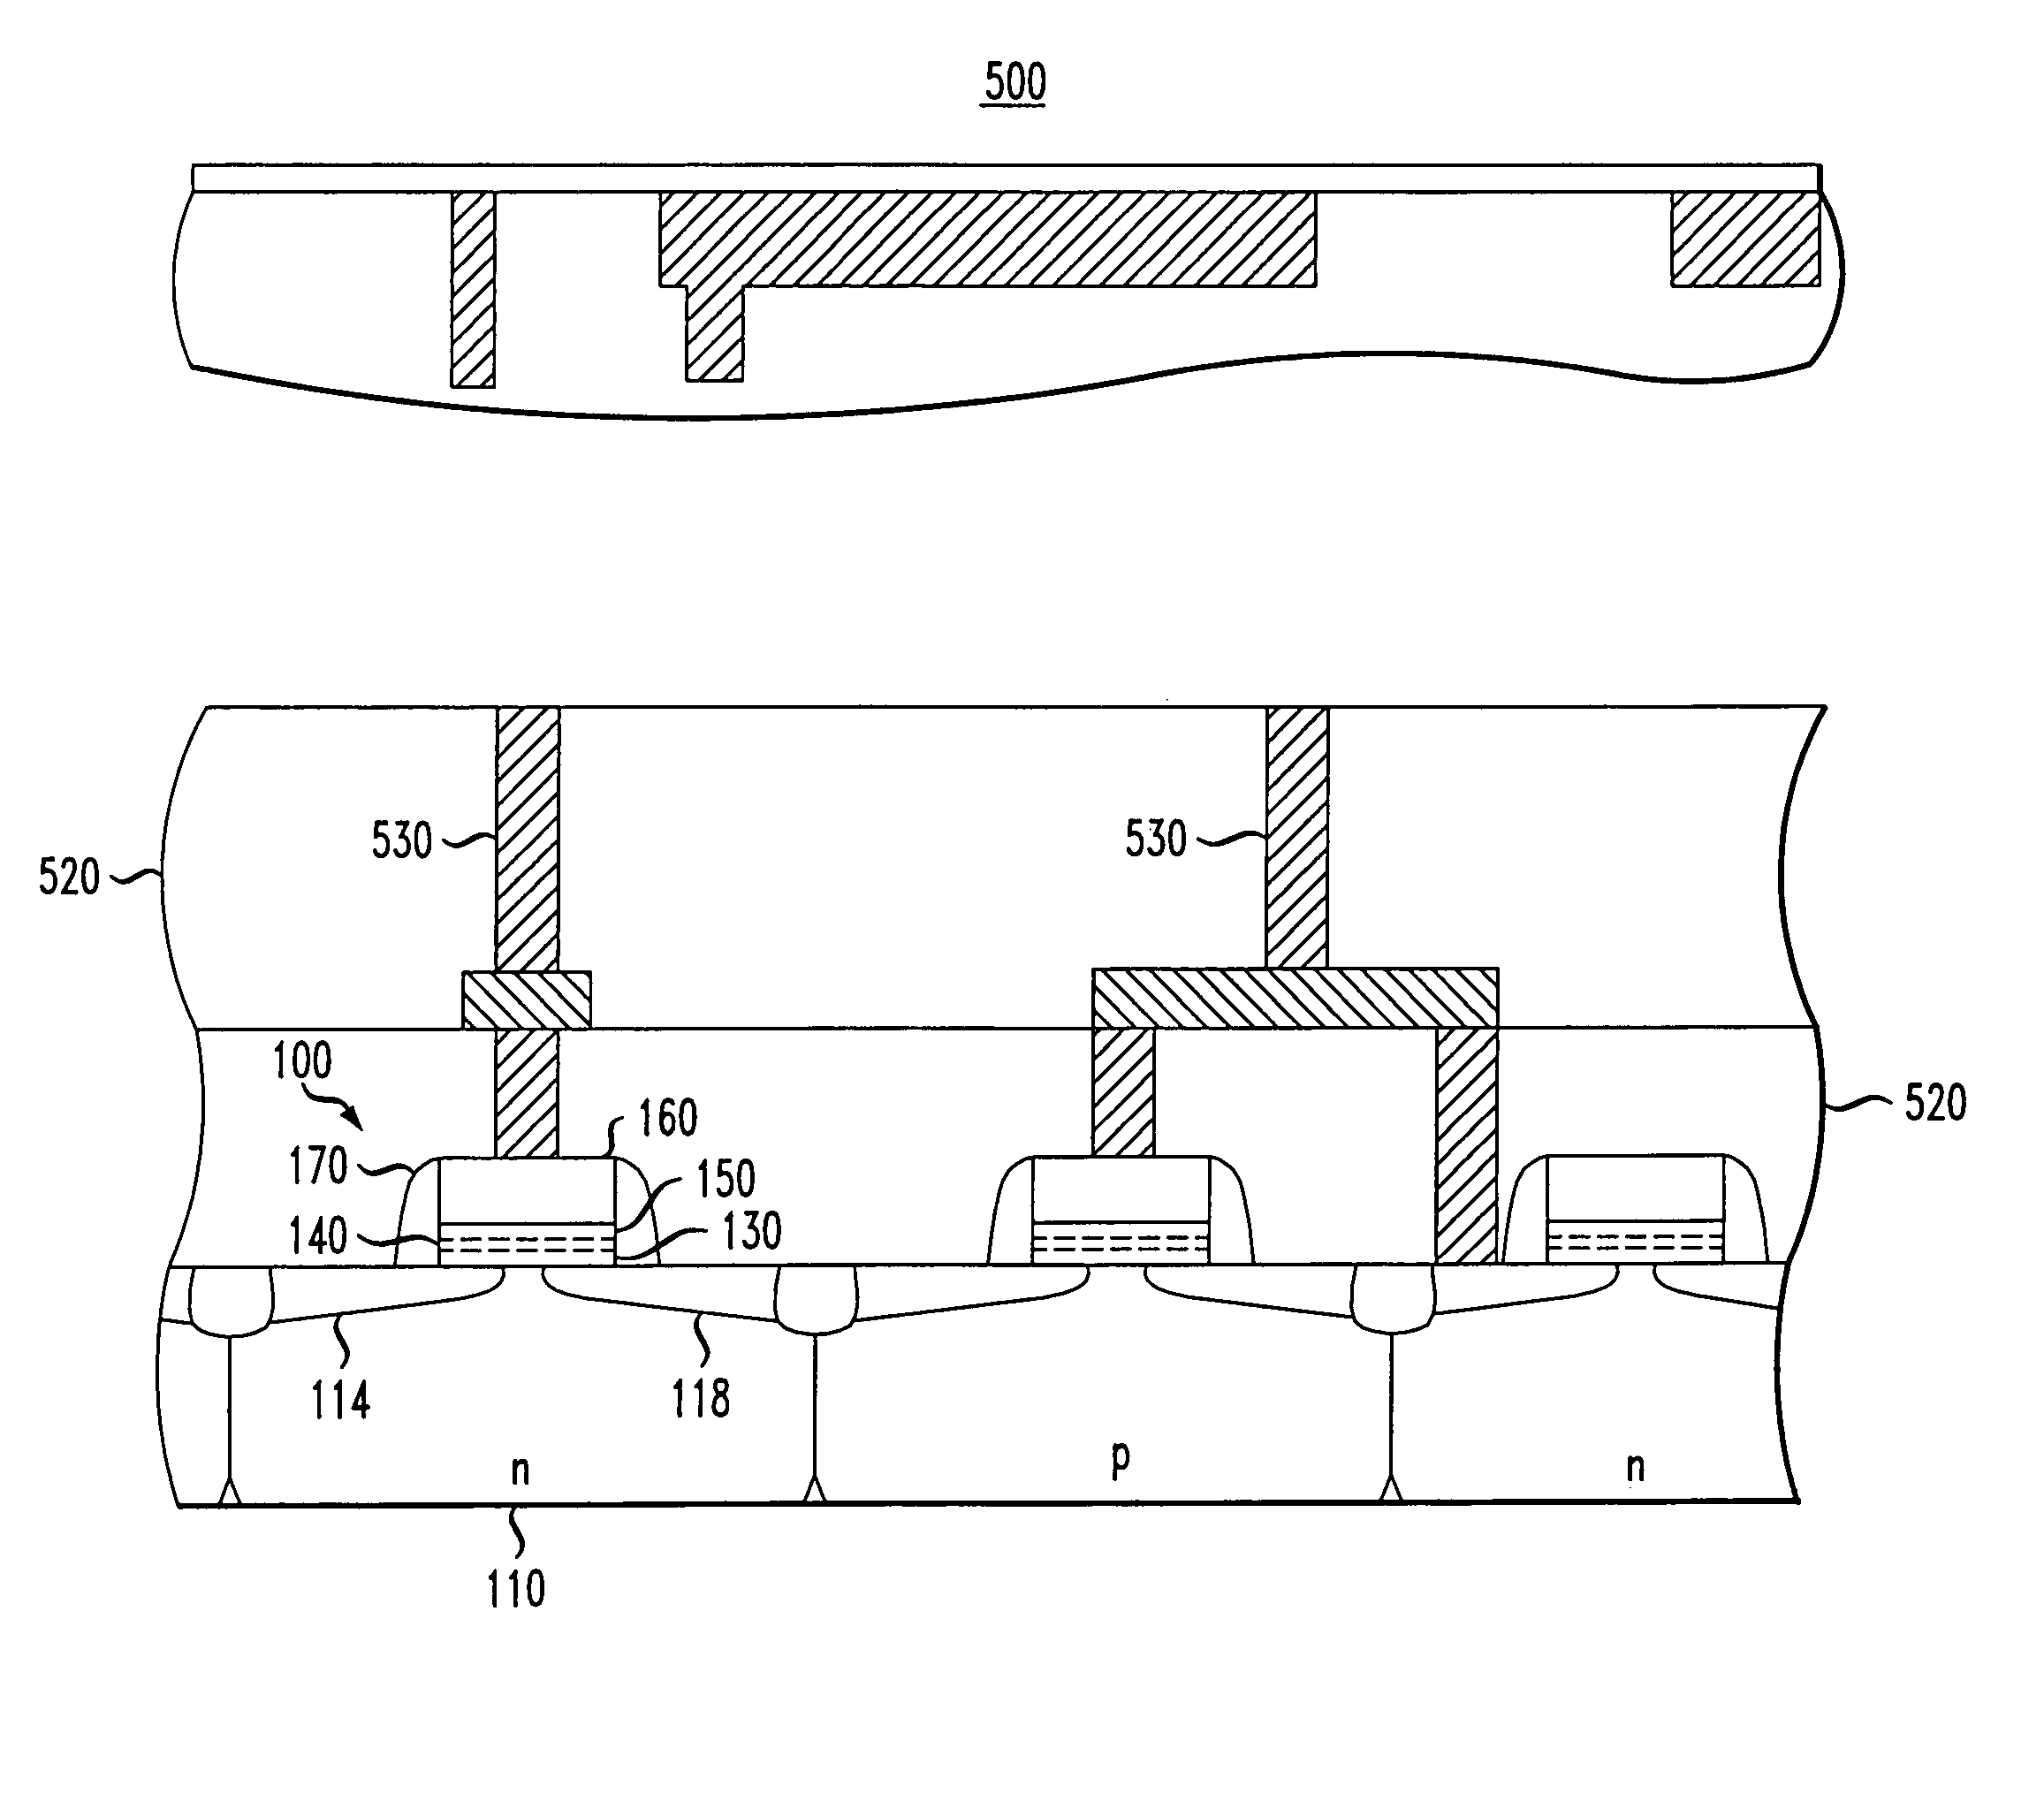 Gate dielectric structure for reducing boron penetration and current leakage